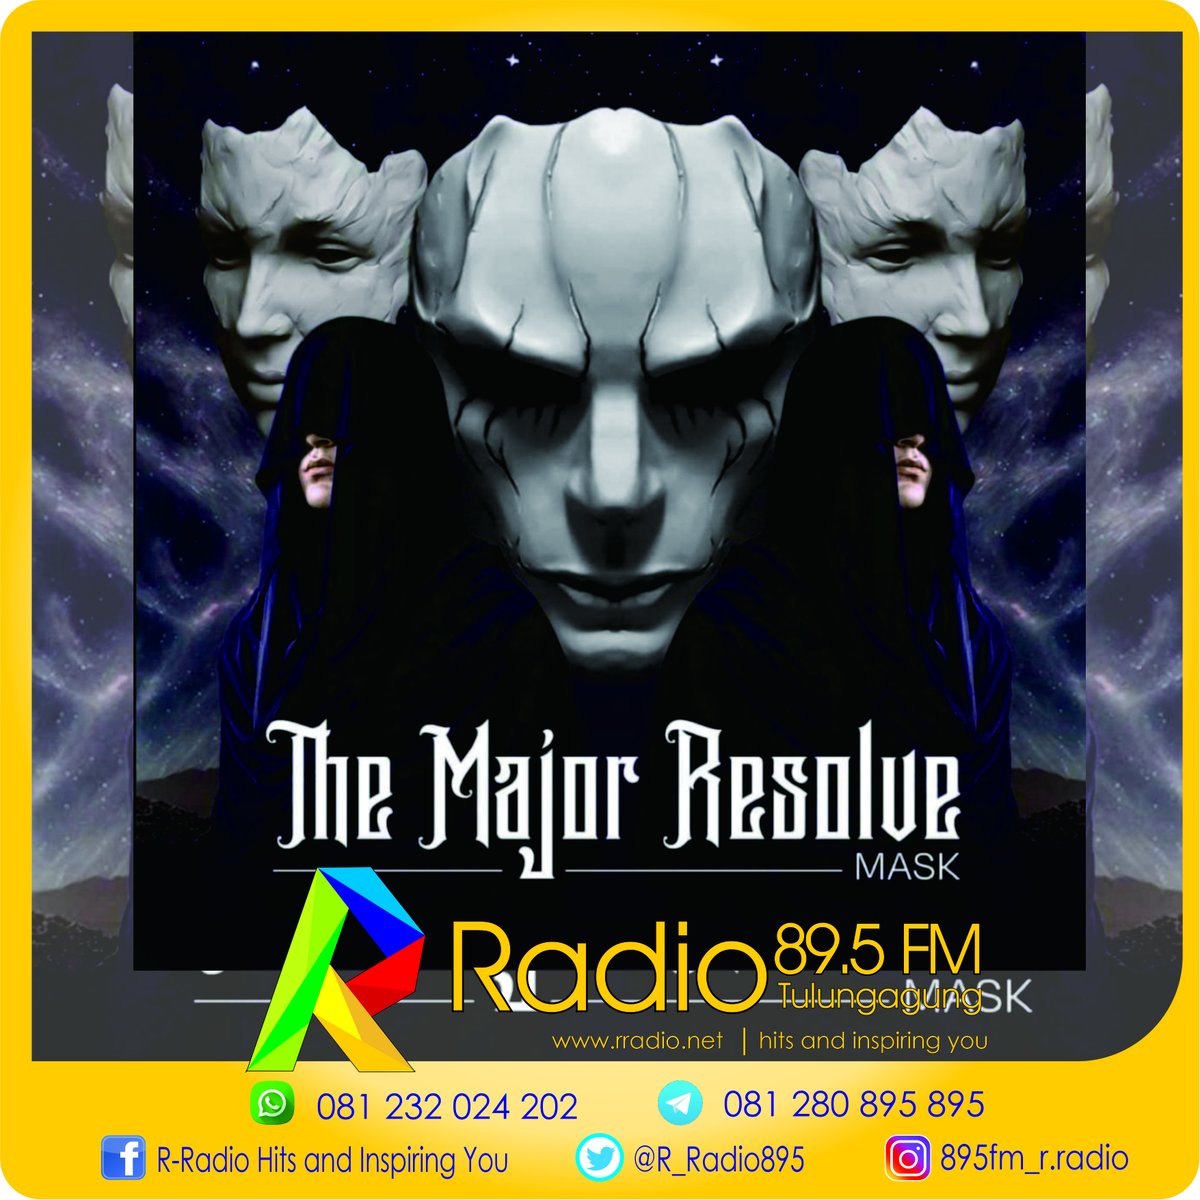 Friends, The Major Resolve’s announce them latest single ‘Mask’ Mask's a song bout reflecting on yo childhood n the family issues within, n as an adult looking back n questioning the reasons why Listen single ‘Mask’ by The Major Resolve only on 89.5 FM R-Radio, Hits N Inspiring U